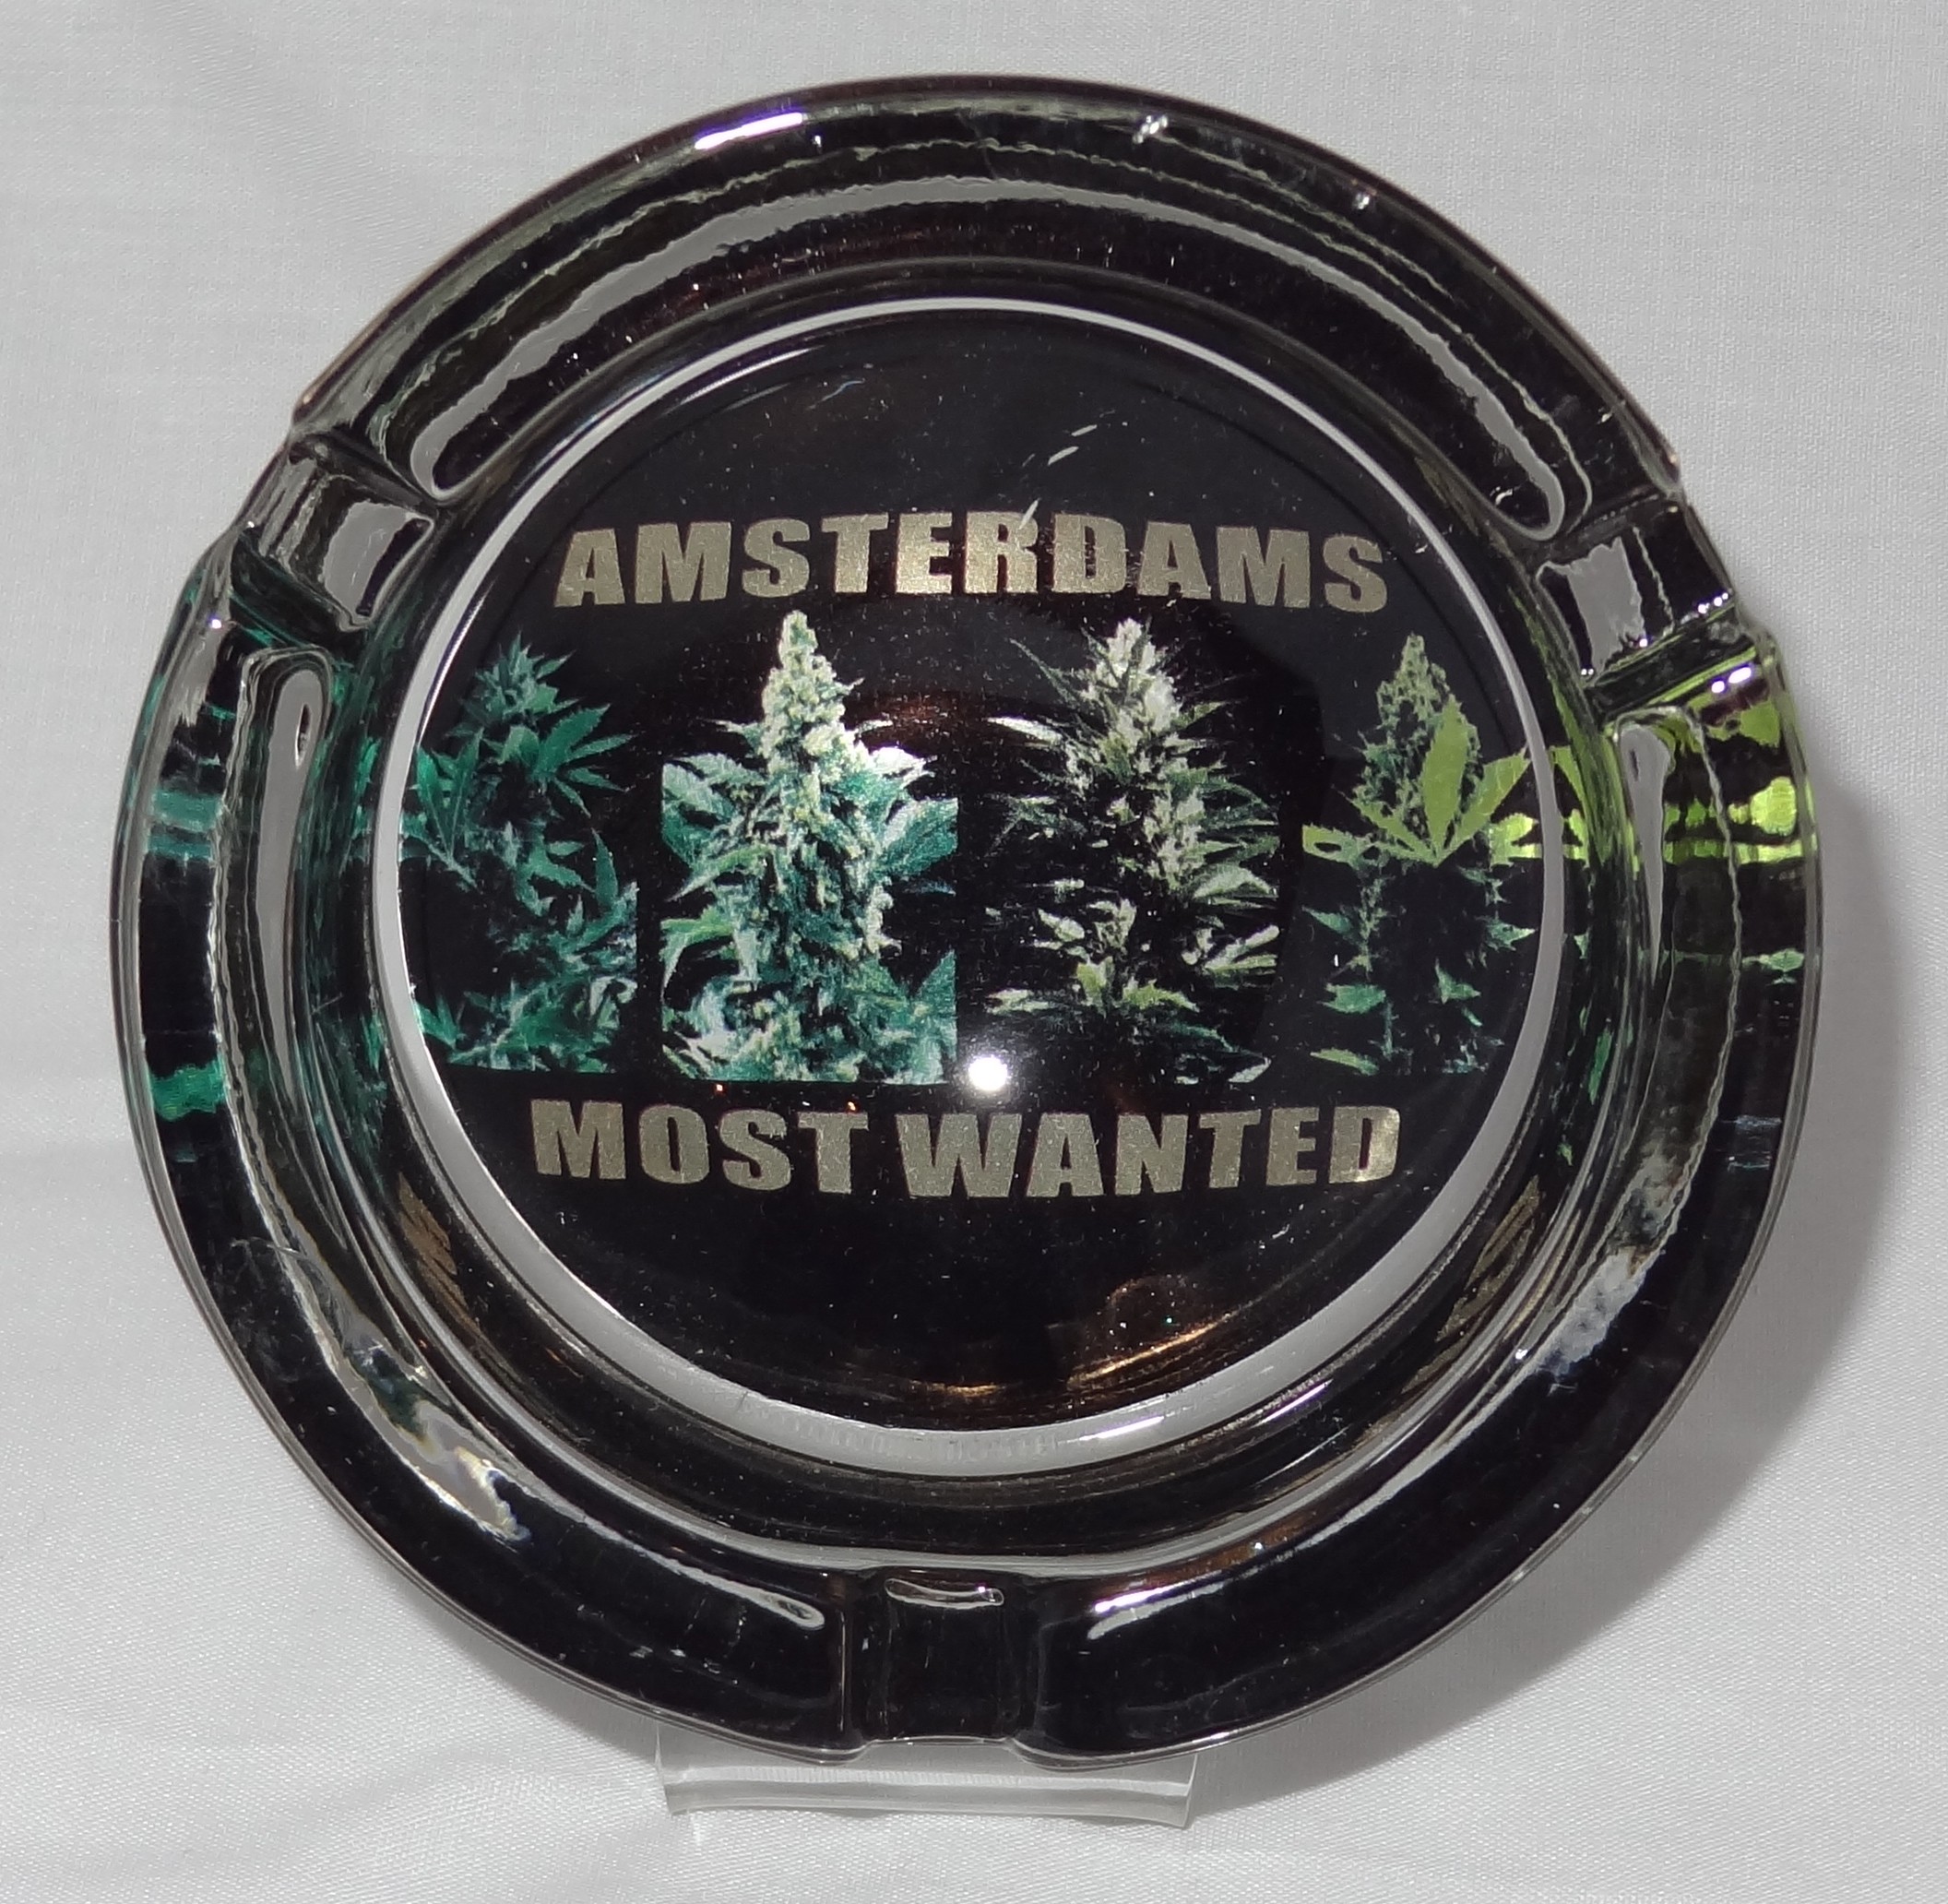 Small Round ASHTRAY - amsterdams most wanted